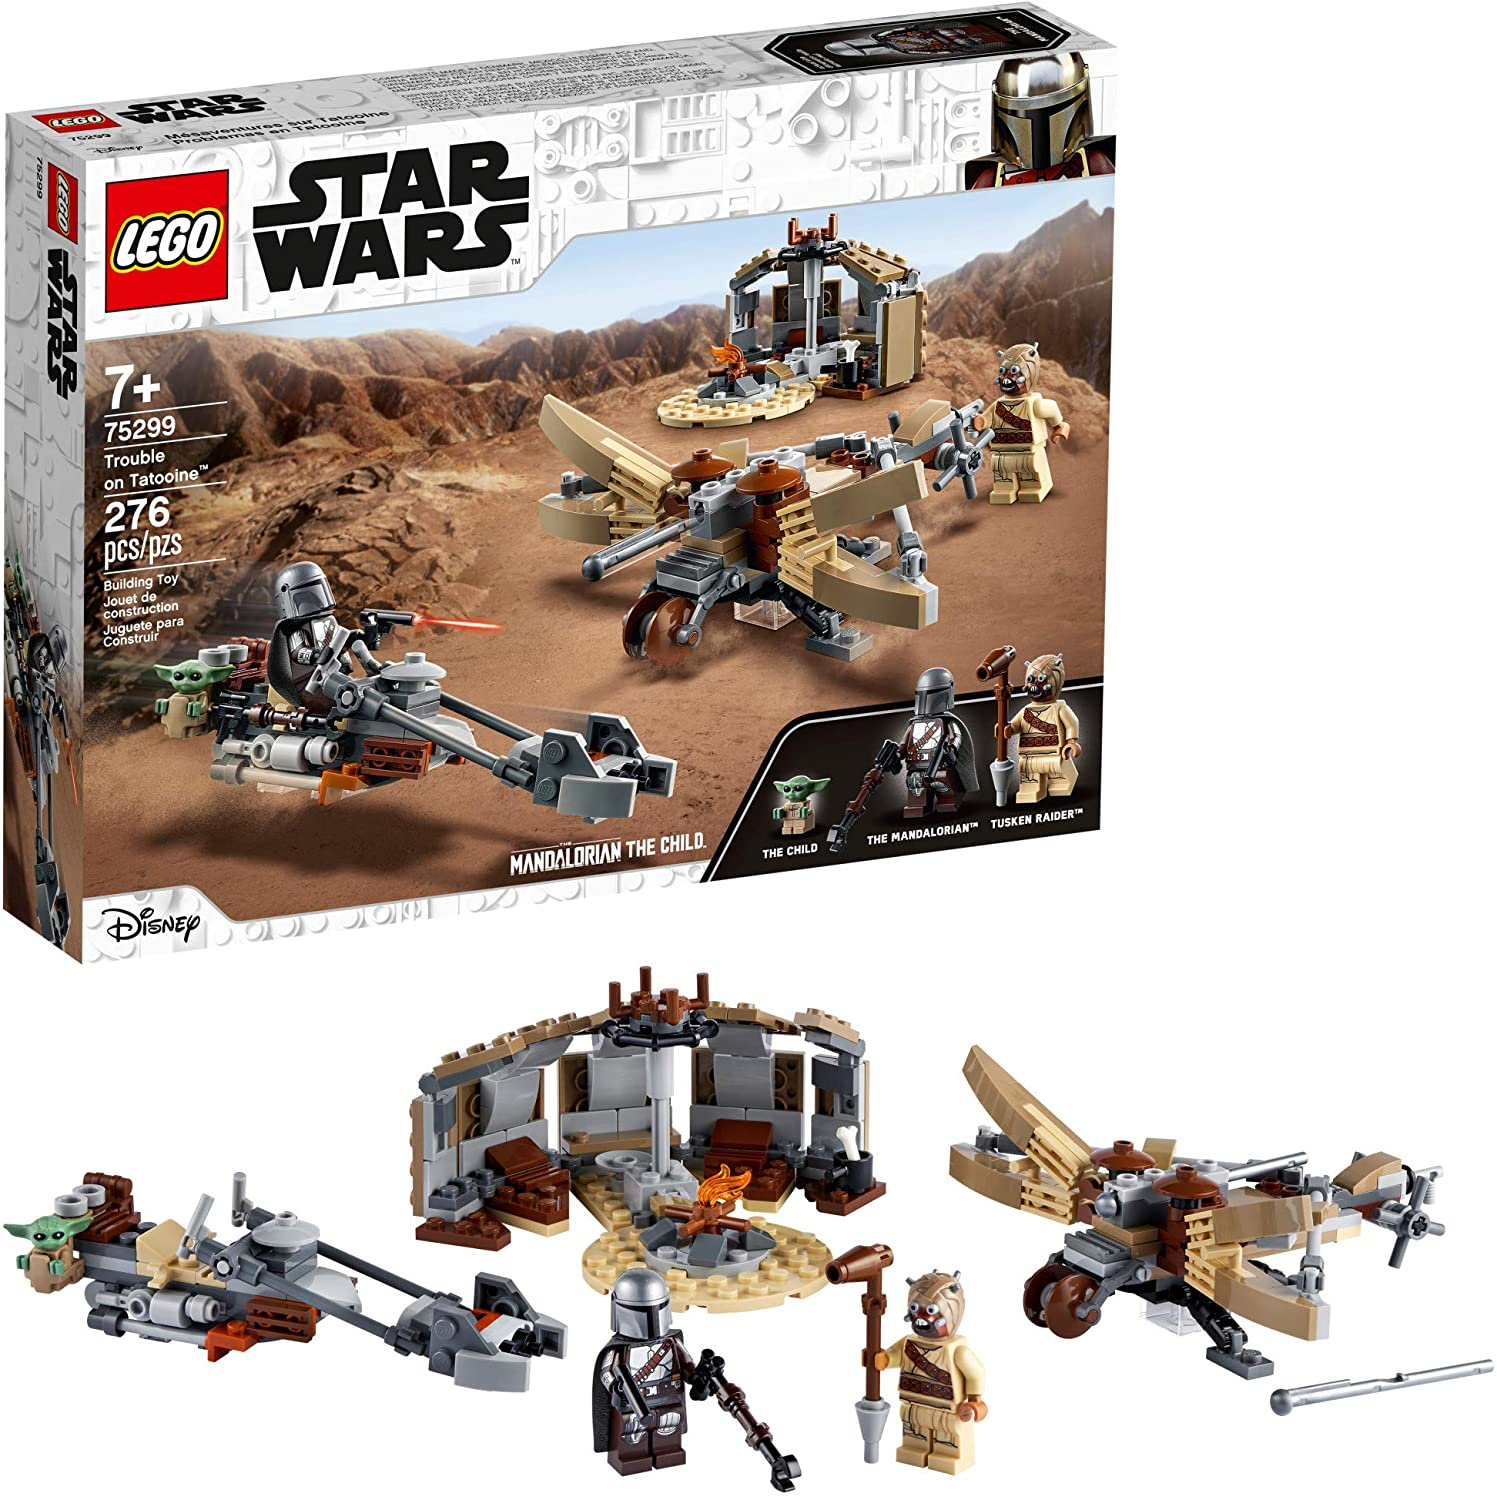 Amazon.com: LEGO Star Wars: The Mandalorian Trouble on Tatooine 75299 Awesome Toy Building Kit for Kids Featuring The Child, New 2021 (277 Pieces) : Toys & Games $23.99